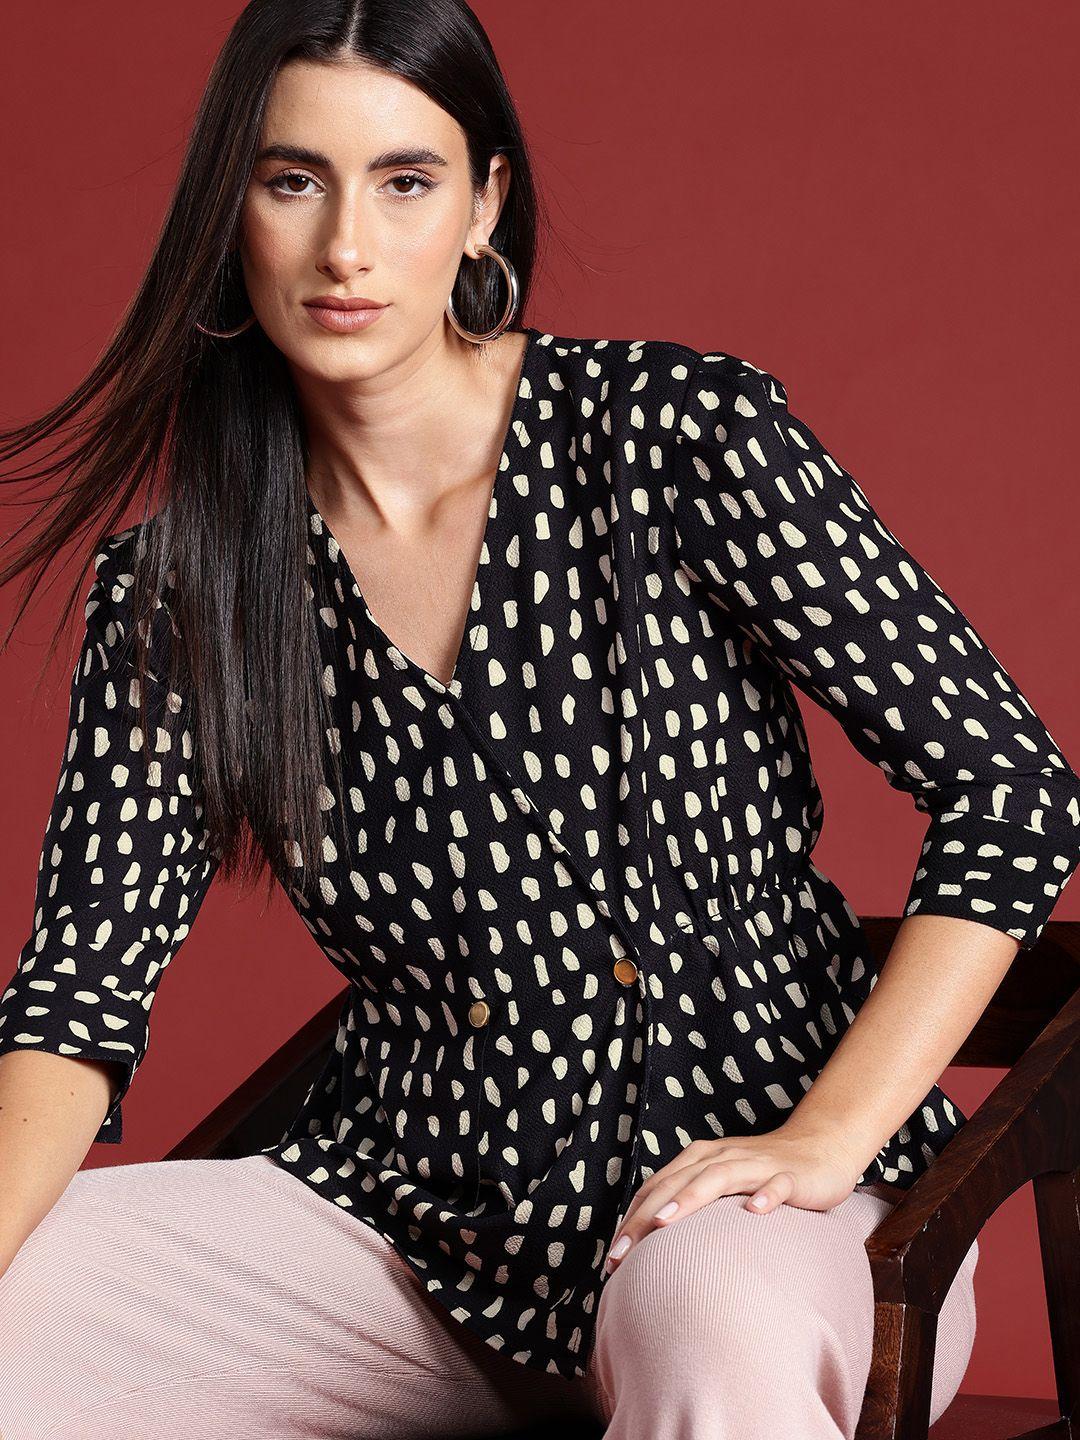 all-about-you-polka-dots-print-wrap-style-top